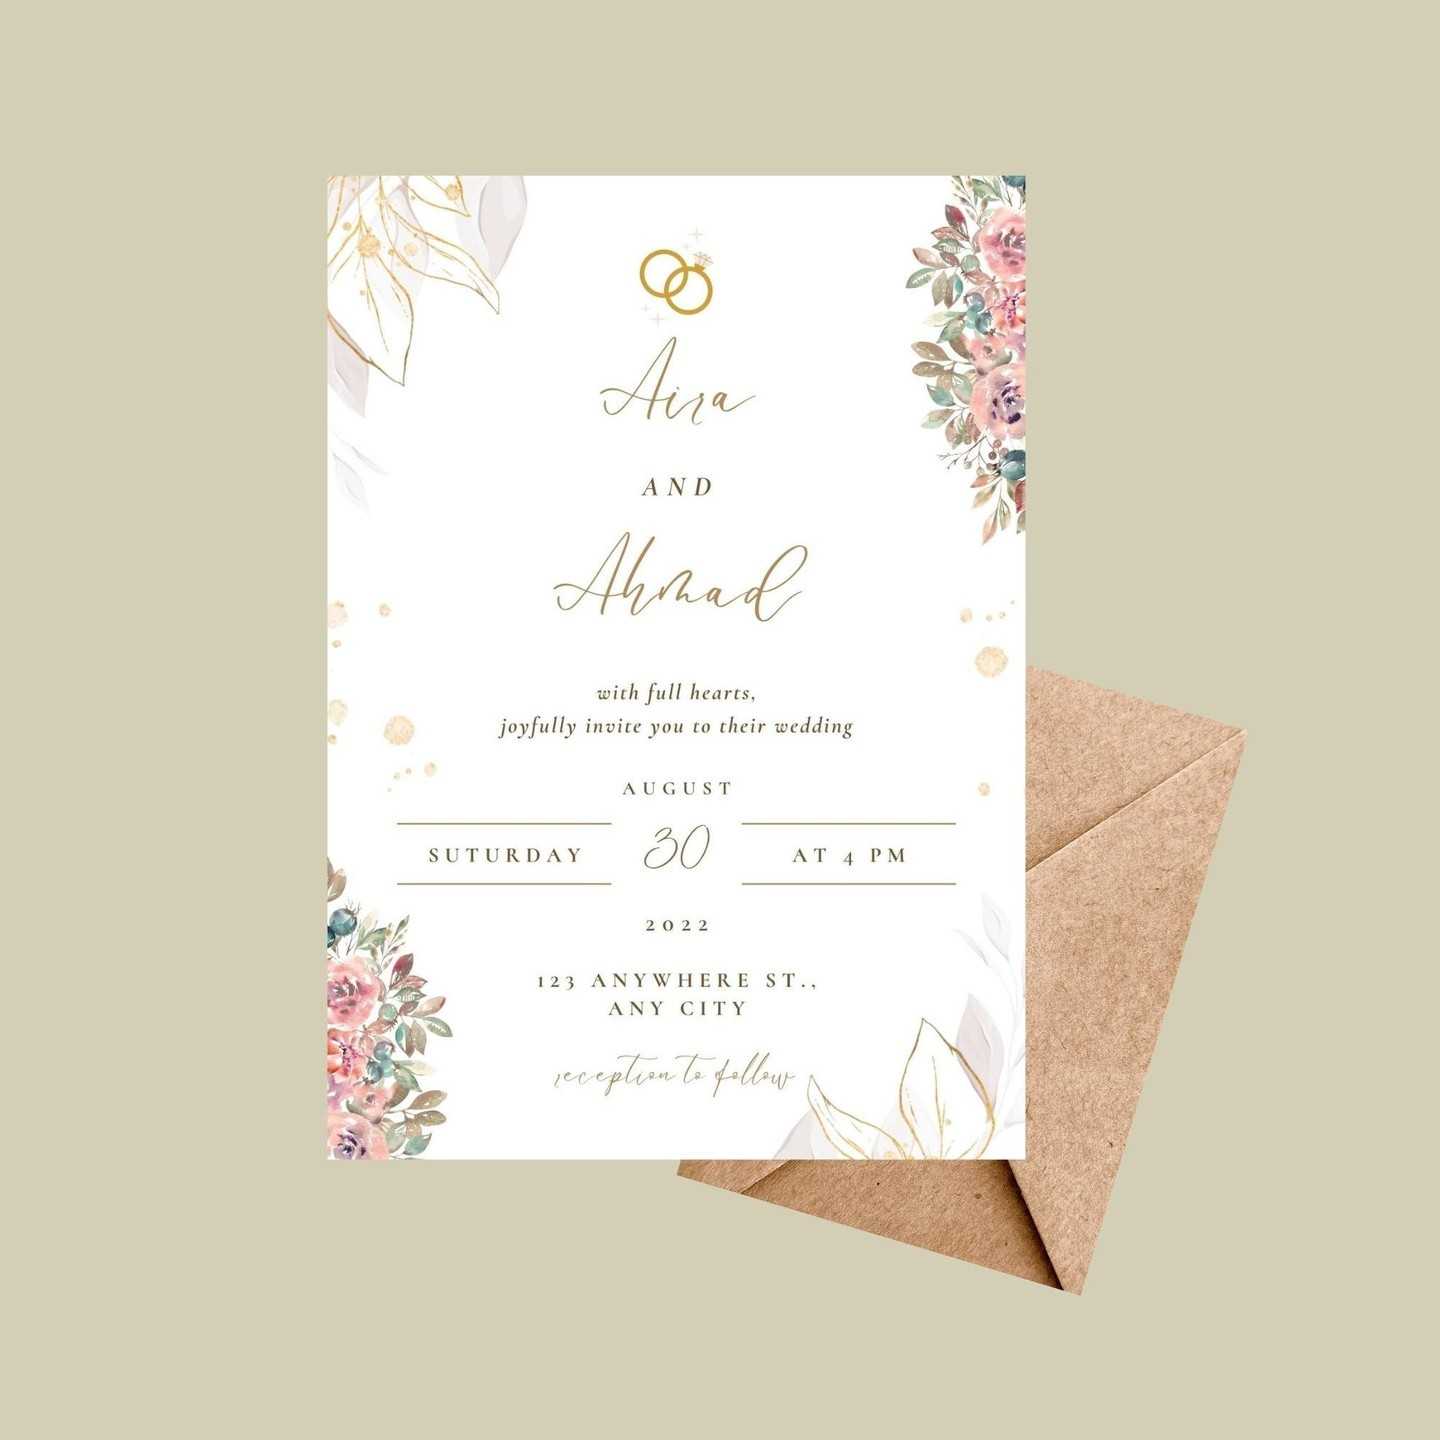 312952439_678314867062146_9153453935917661463_nbest-free-place-card-template-for-weddings-2023.jpg